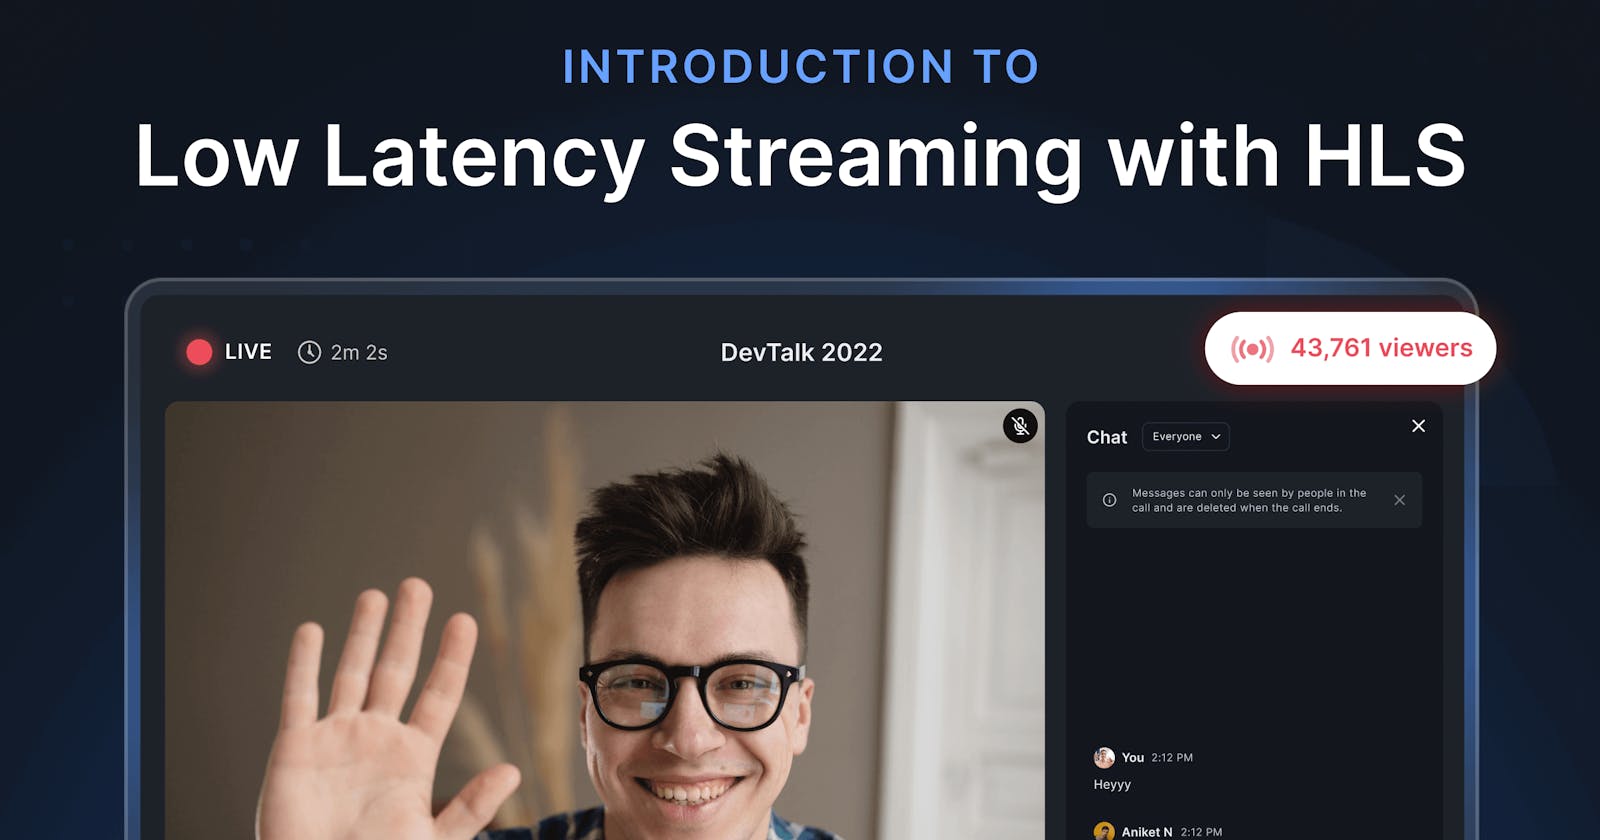 Introduction to Low Latency Streaming with HLS